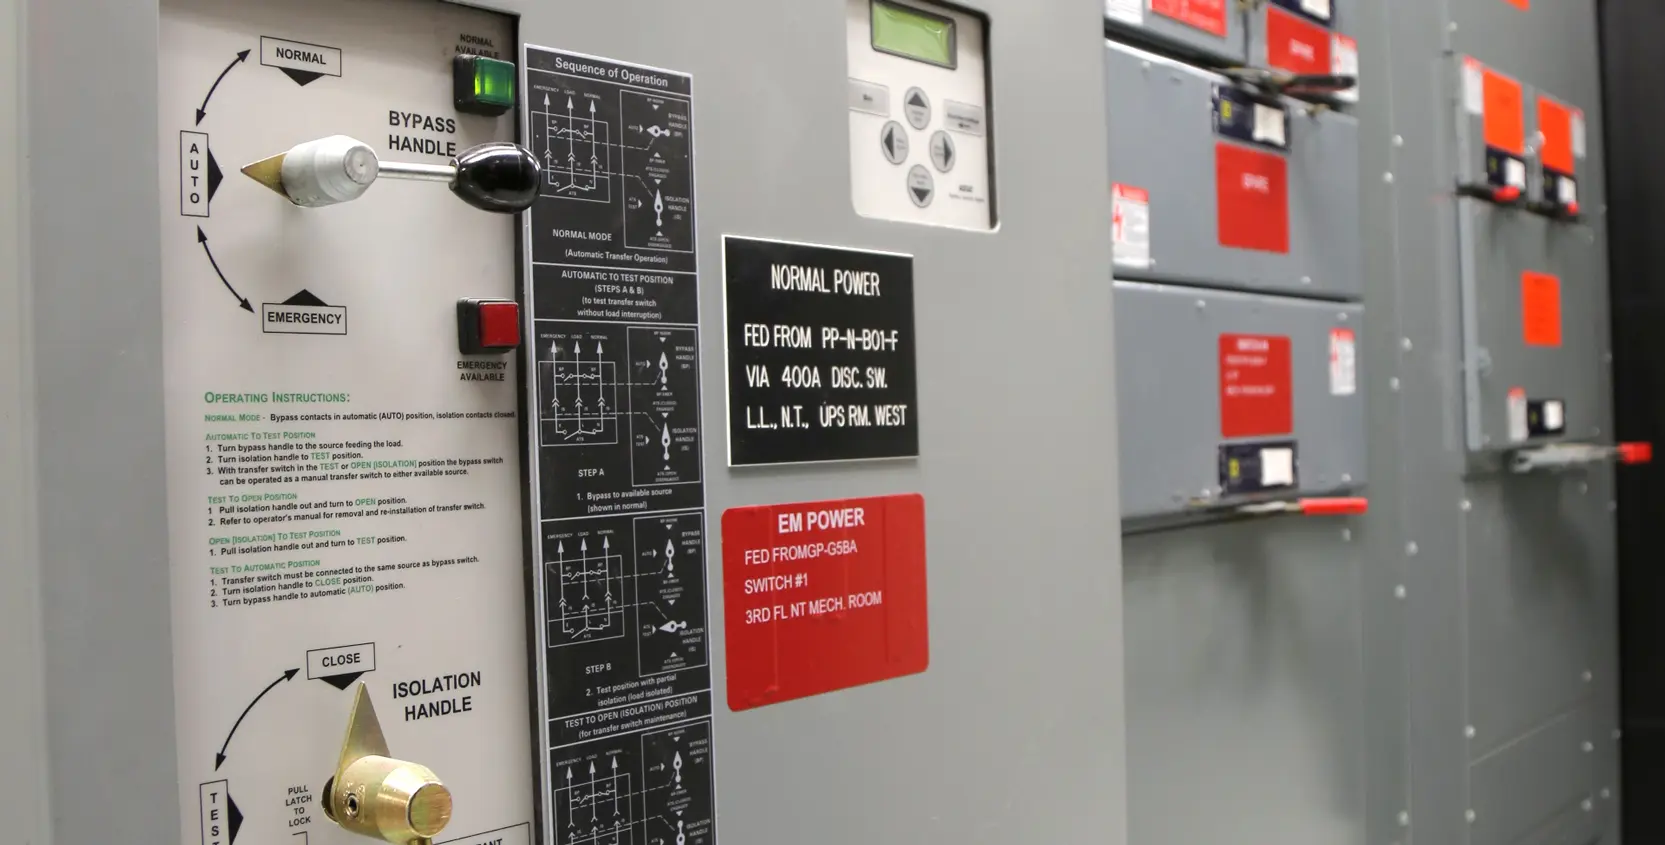 Beaumont-Royal-Oak-Emergency-Power-System-Upgrade-Electrical-3-1665x845